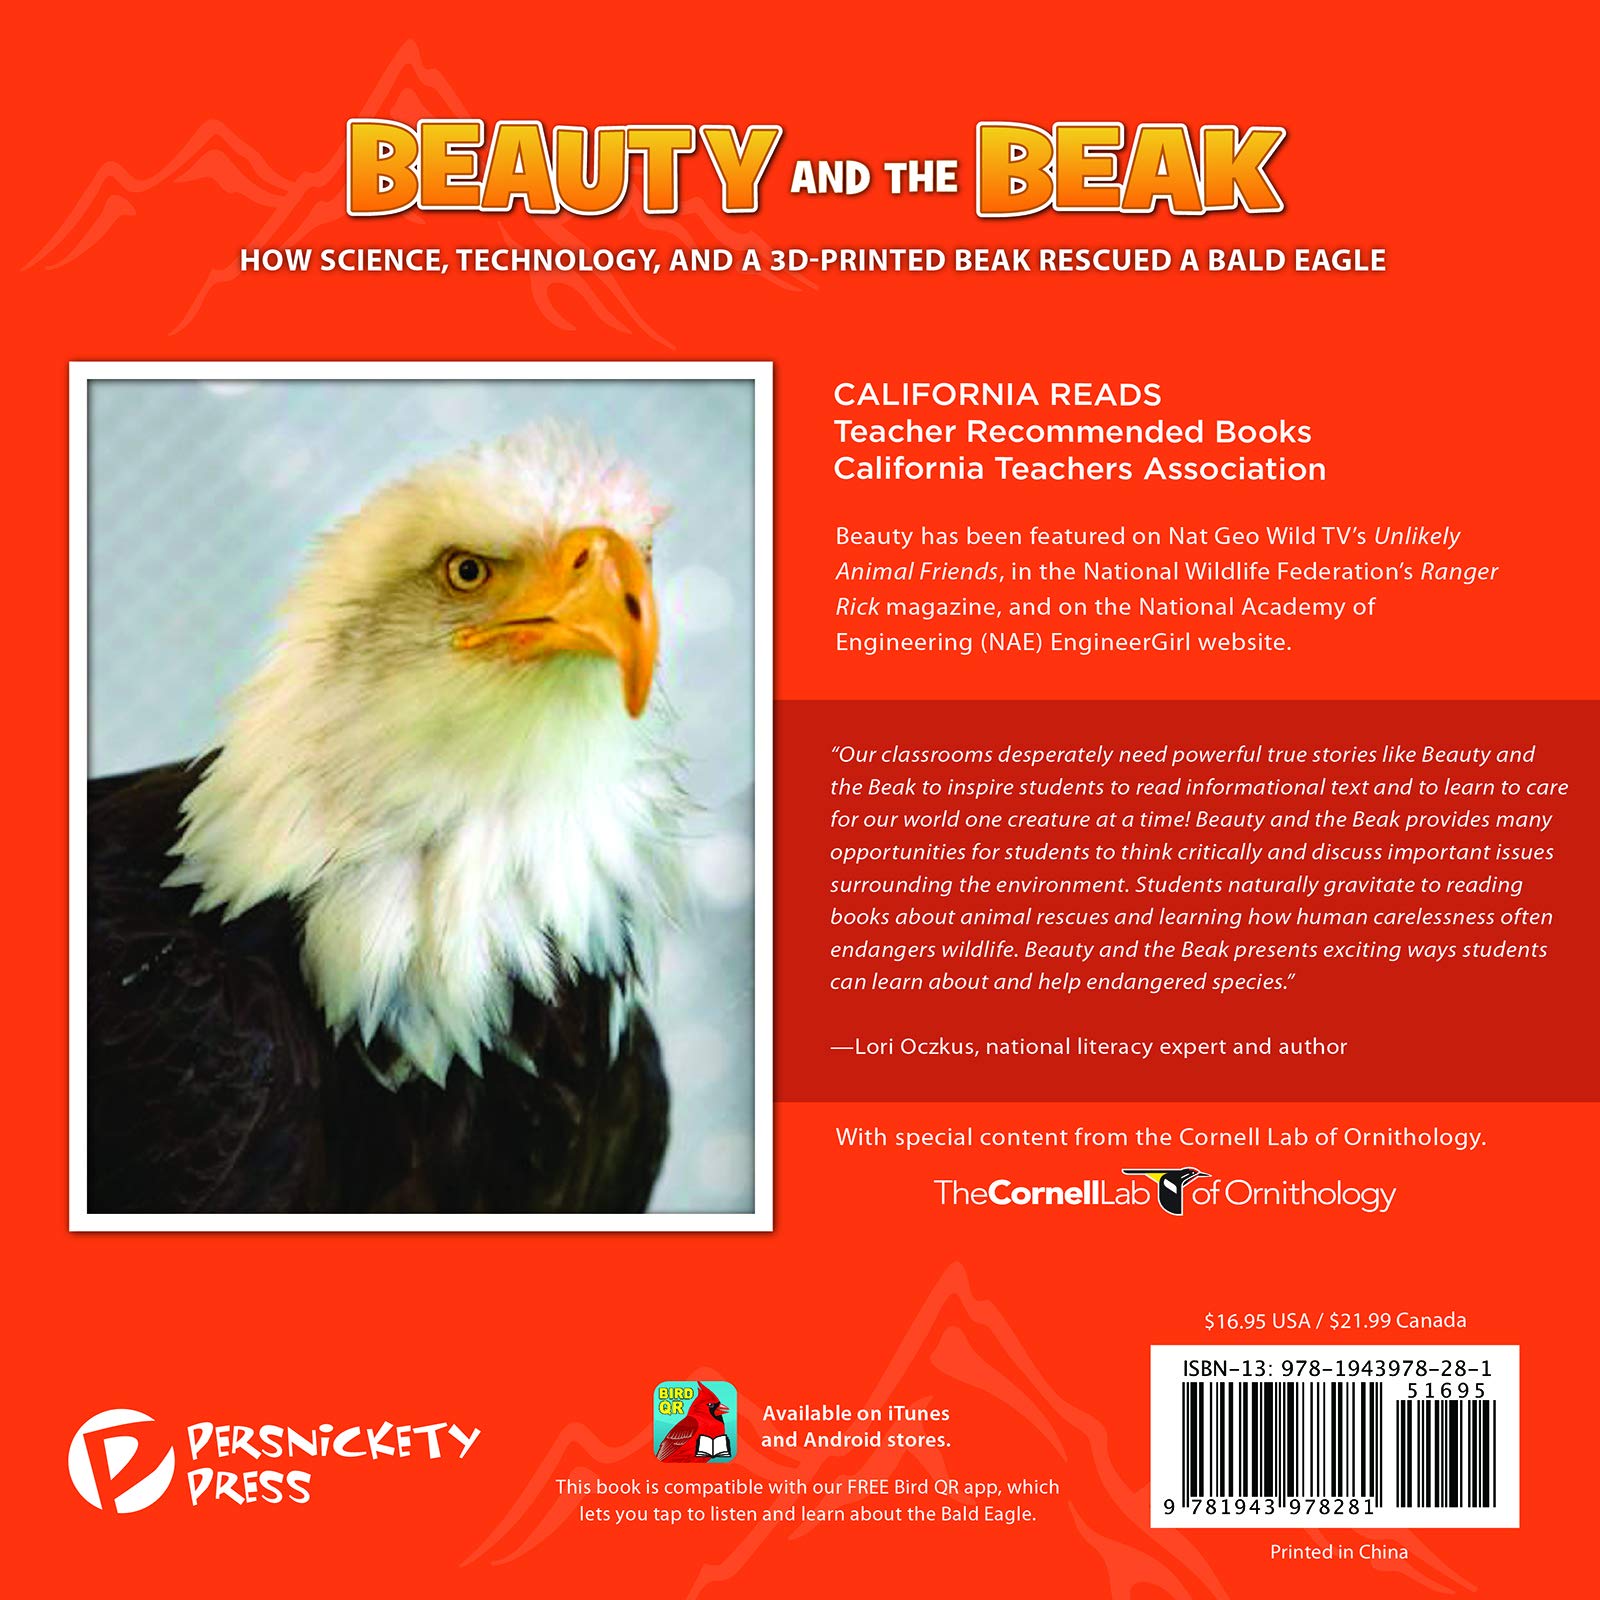 Beauty and the Beak: How Science, Technology, and a 3D-Printed Beak Rescued a Bald Eagle